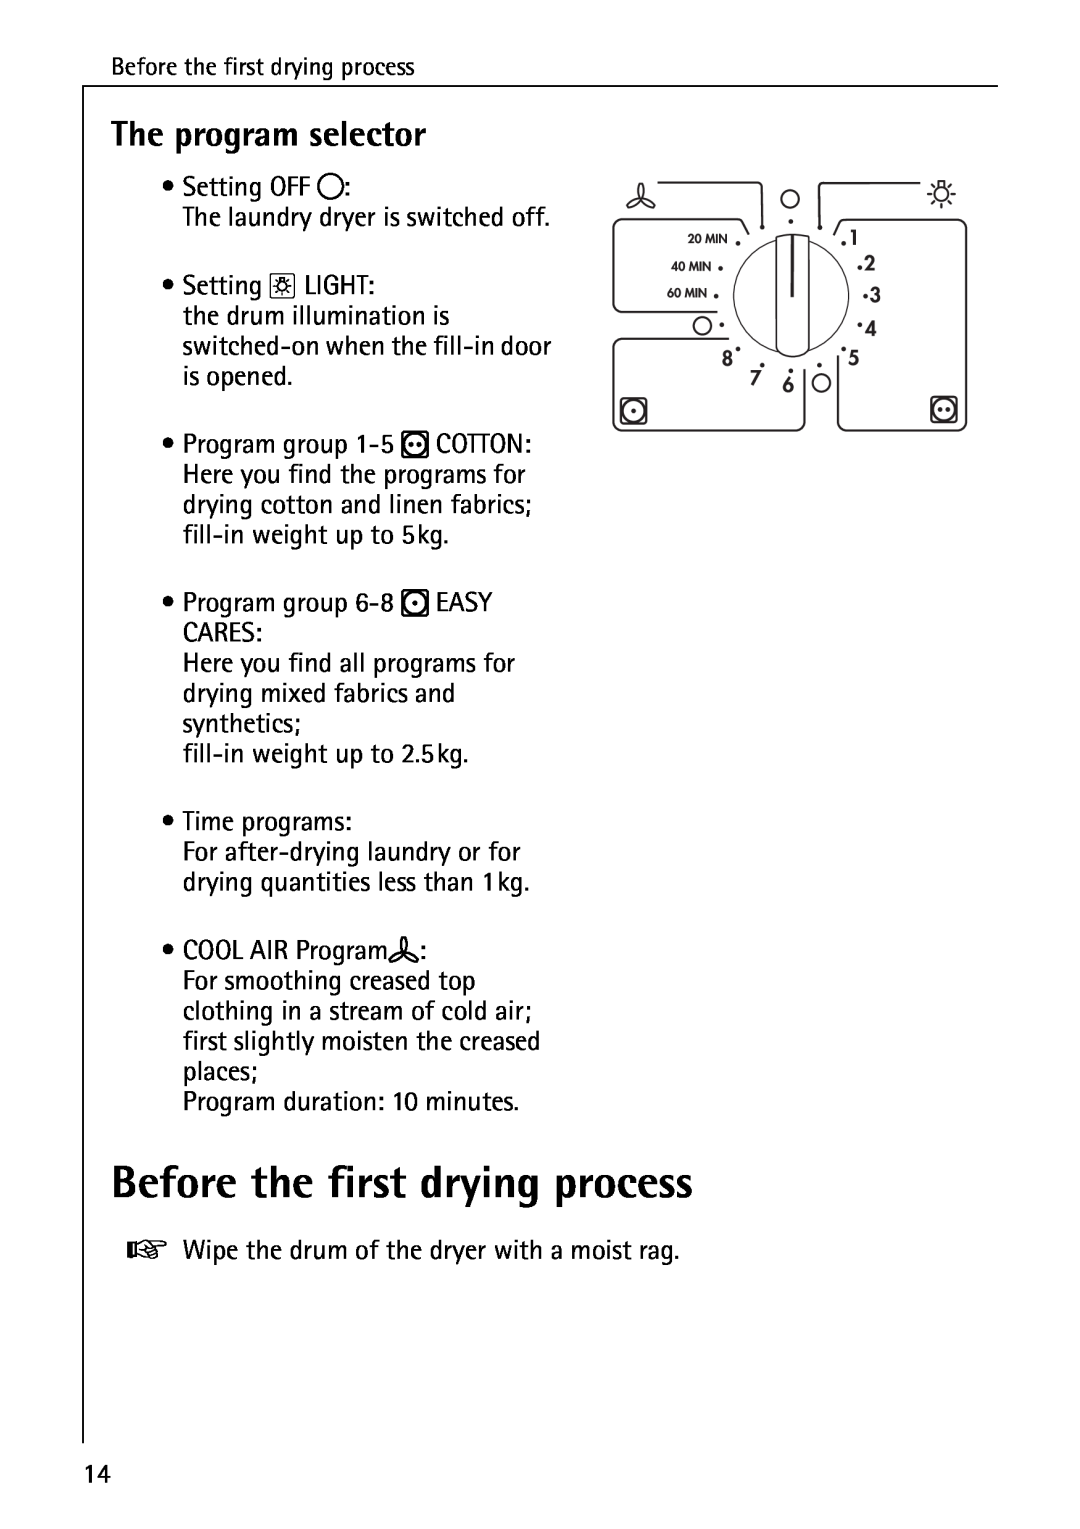 AEG 56609 operating instructions Before the first drying process, The program selector 